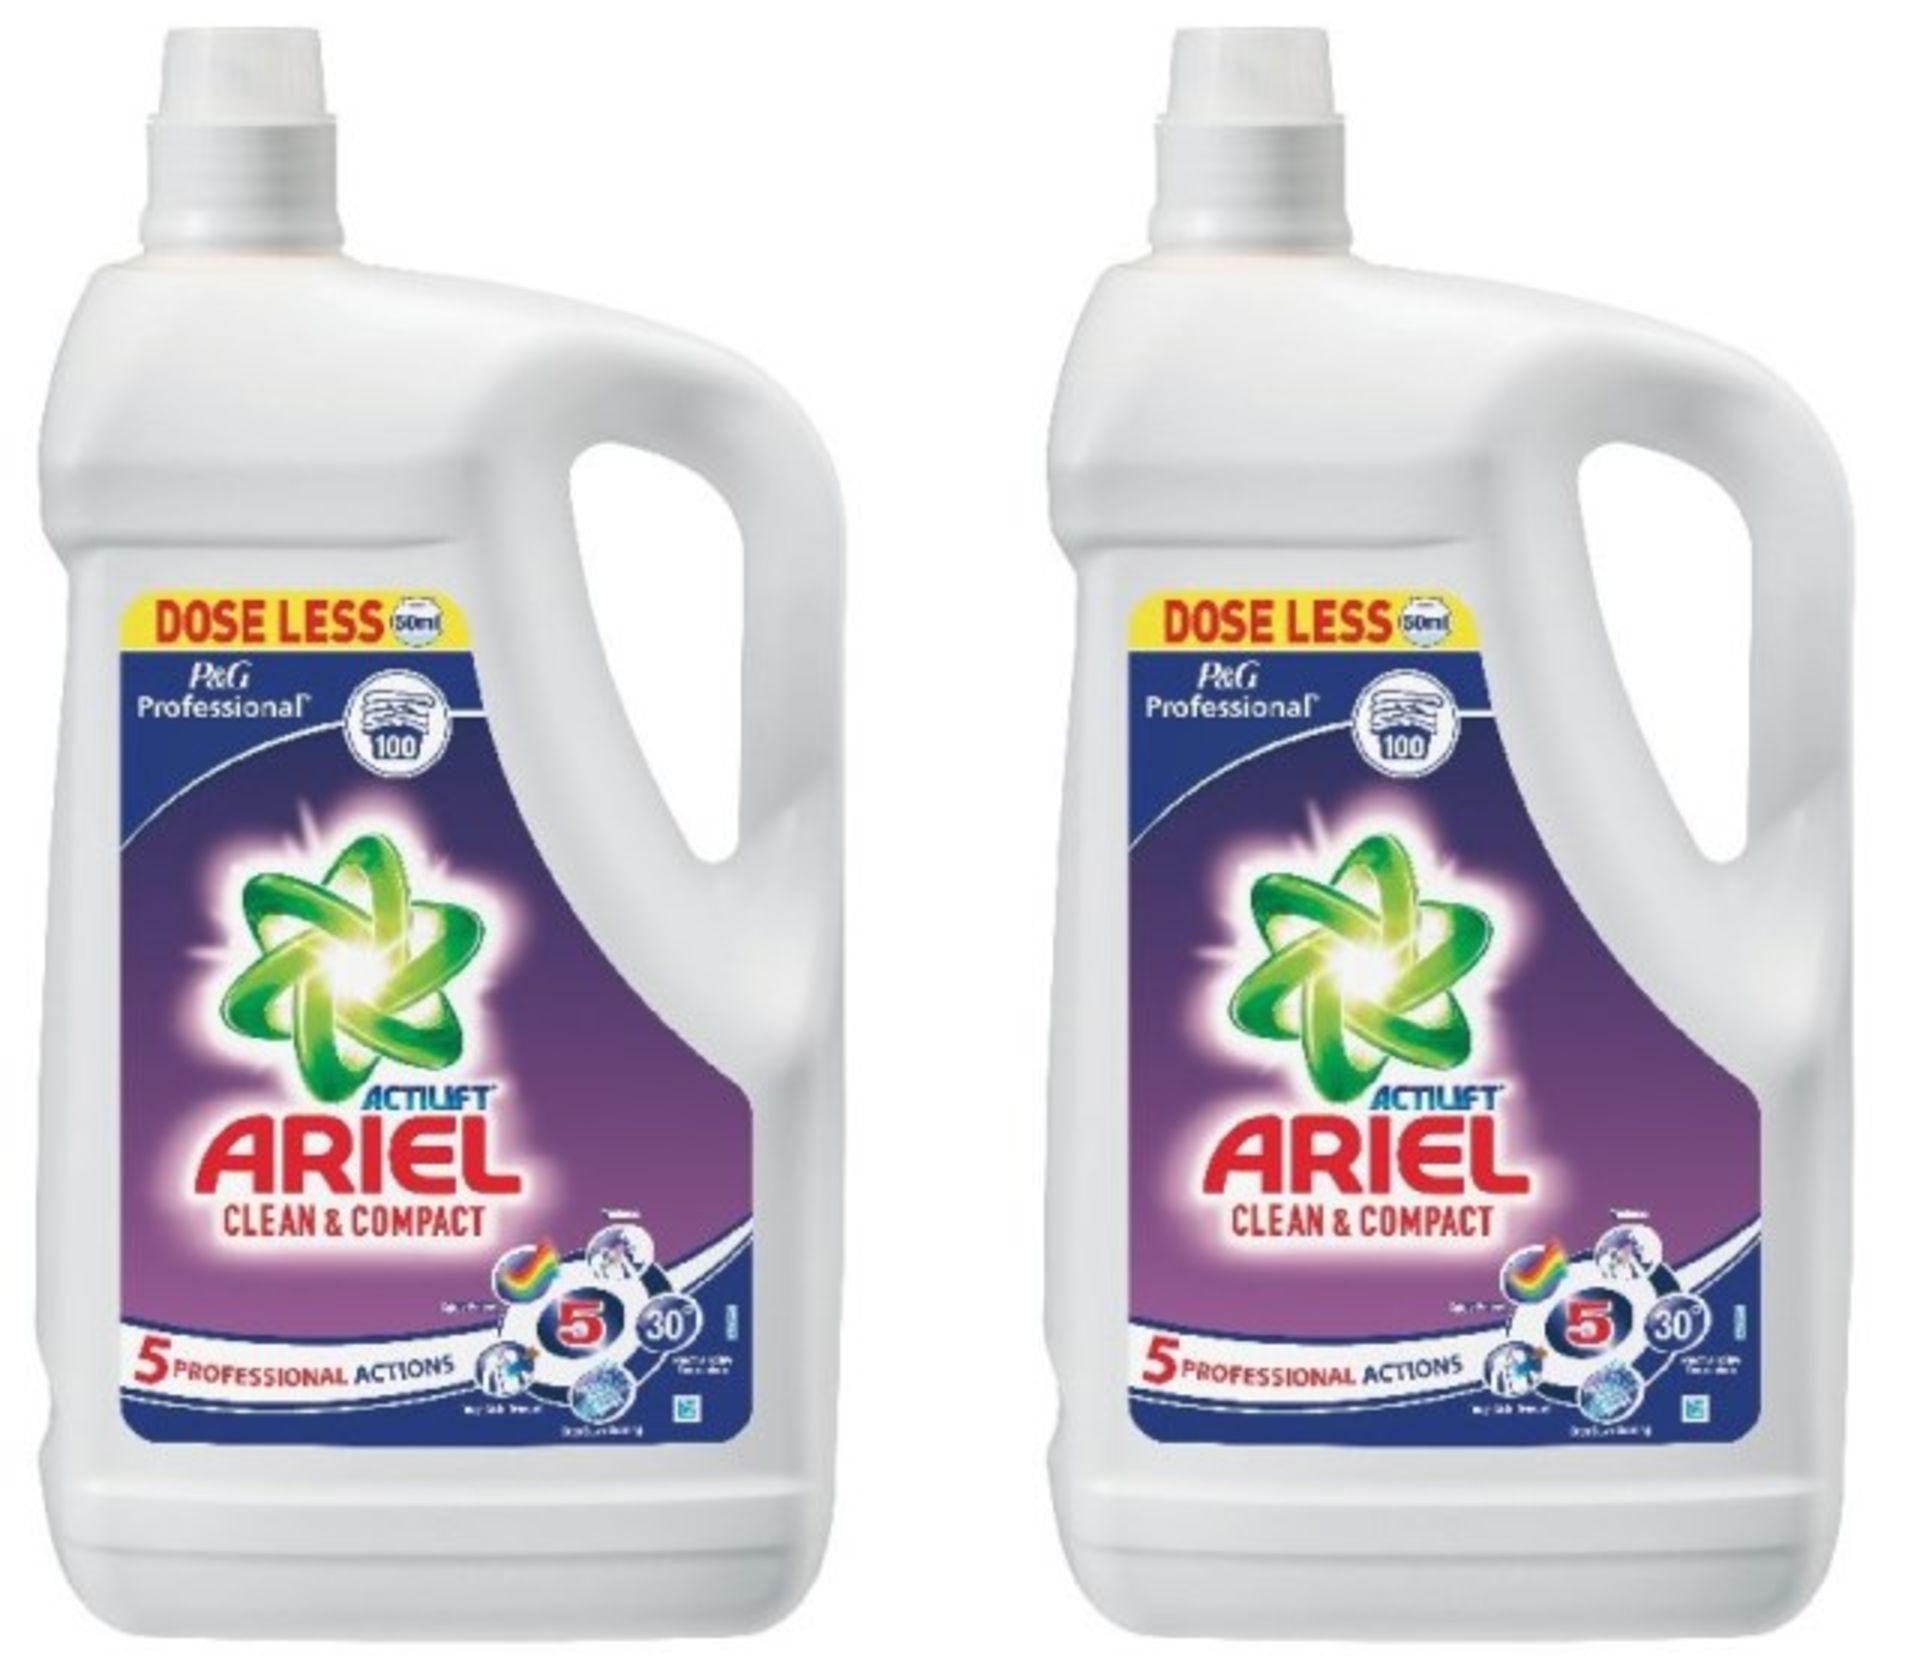 V Brand New Ariel Liquid 5L Colour 5 Professional Actions Duo Pack 200 Washes RRP: £53.98